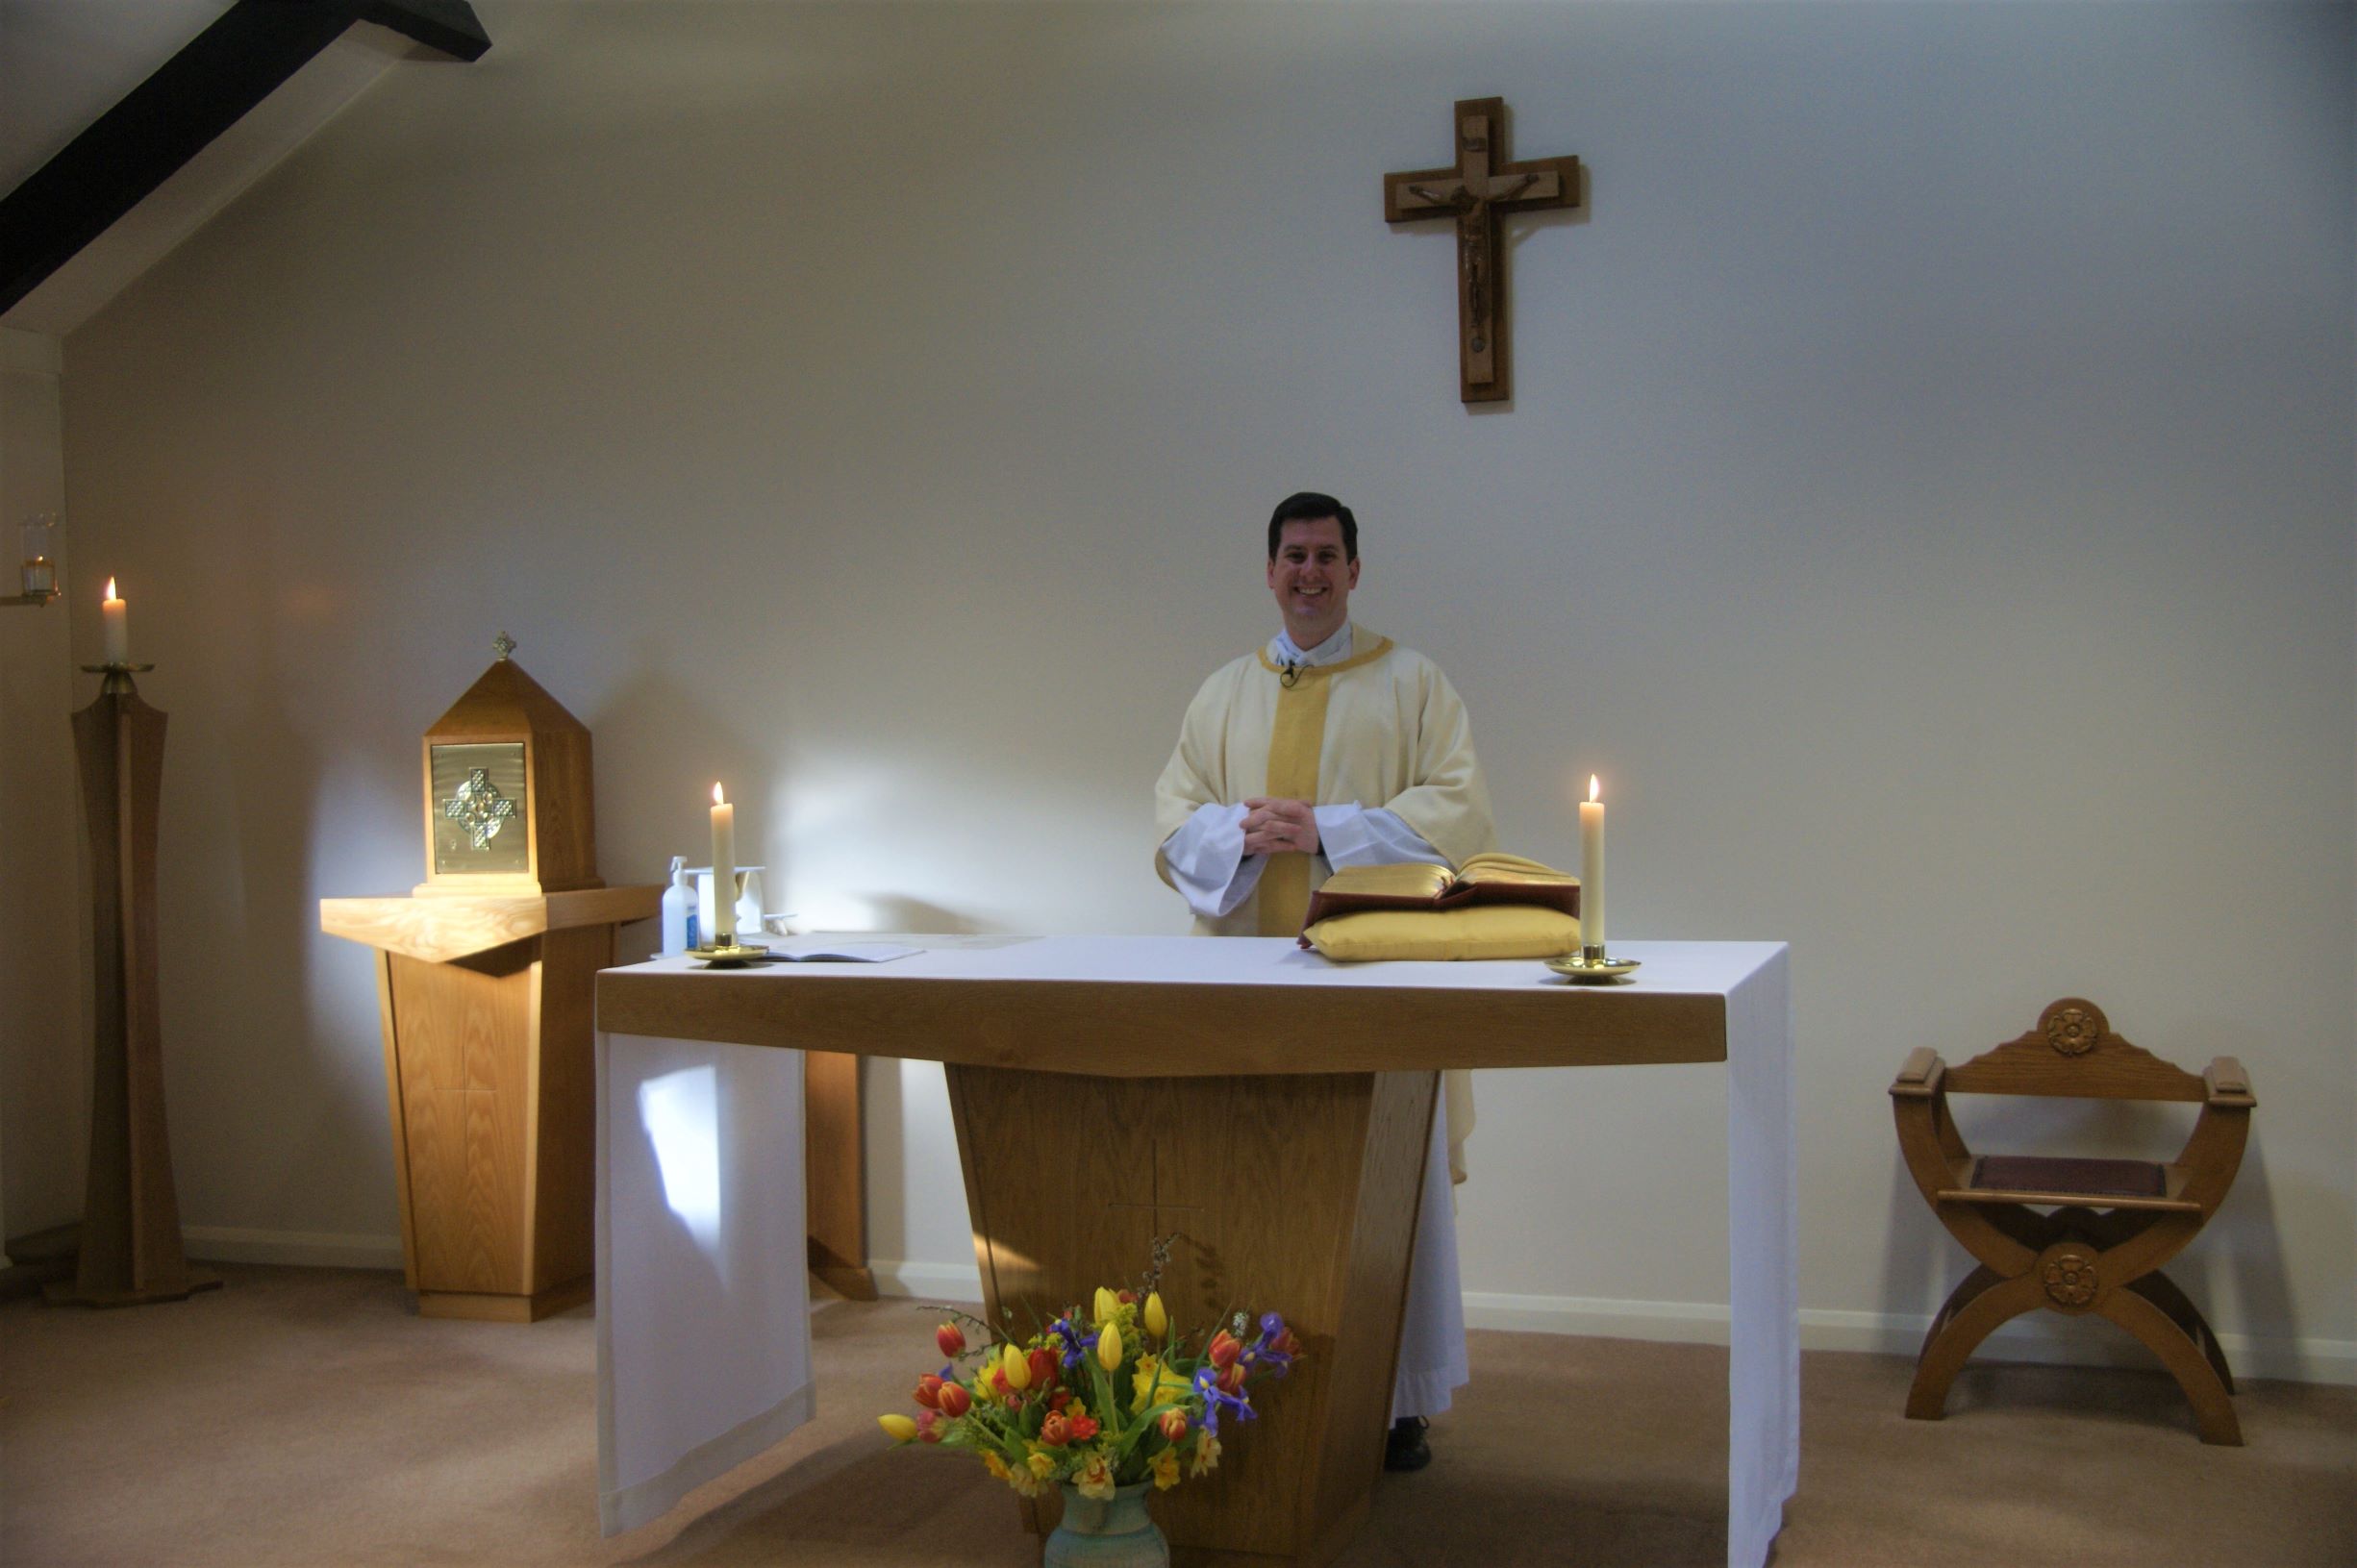 We Welcome Fr Liam Our New Chaplain